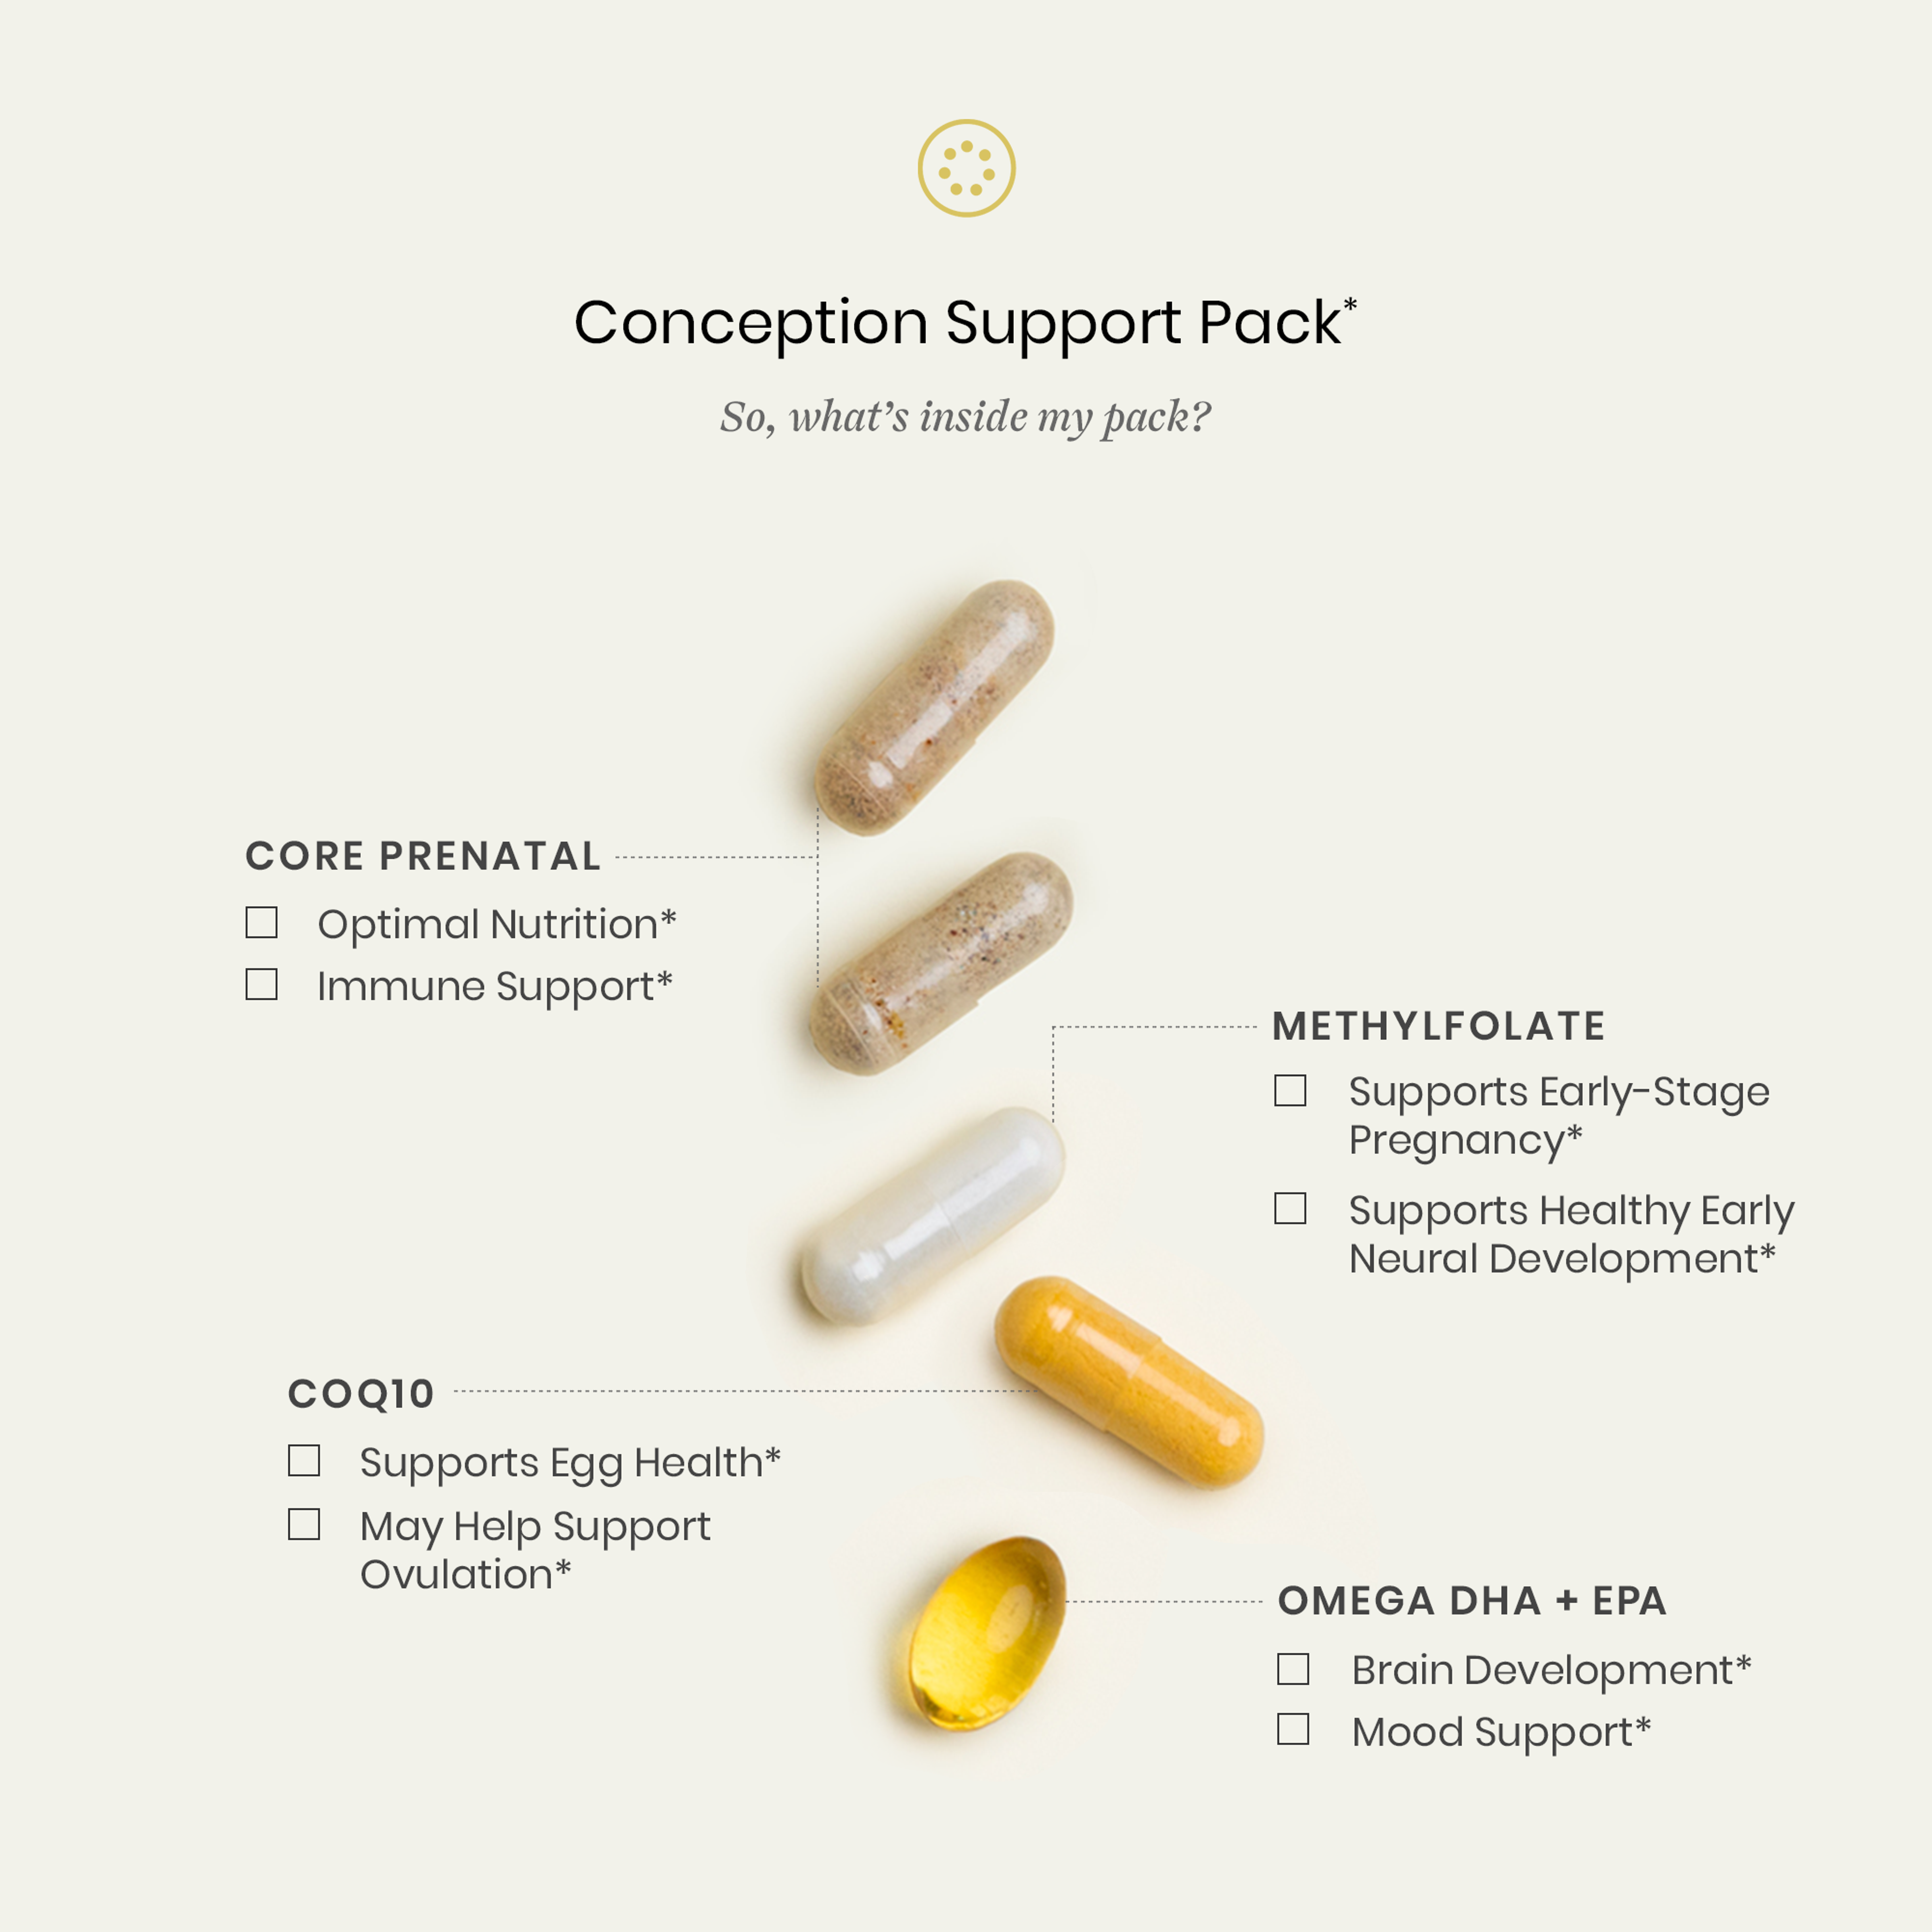 Conception Prenatal Support Pack*